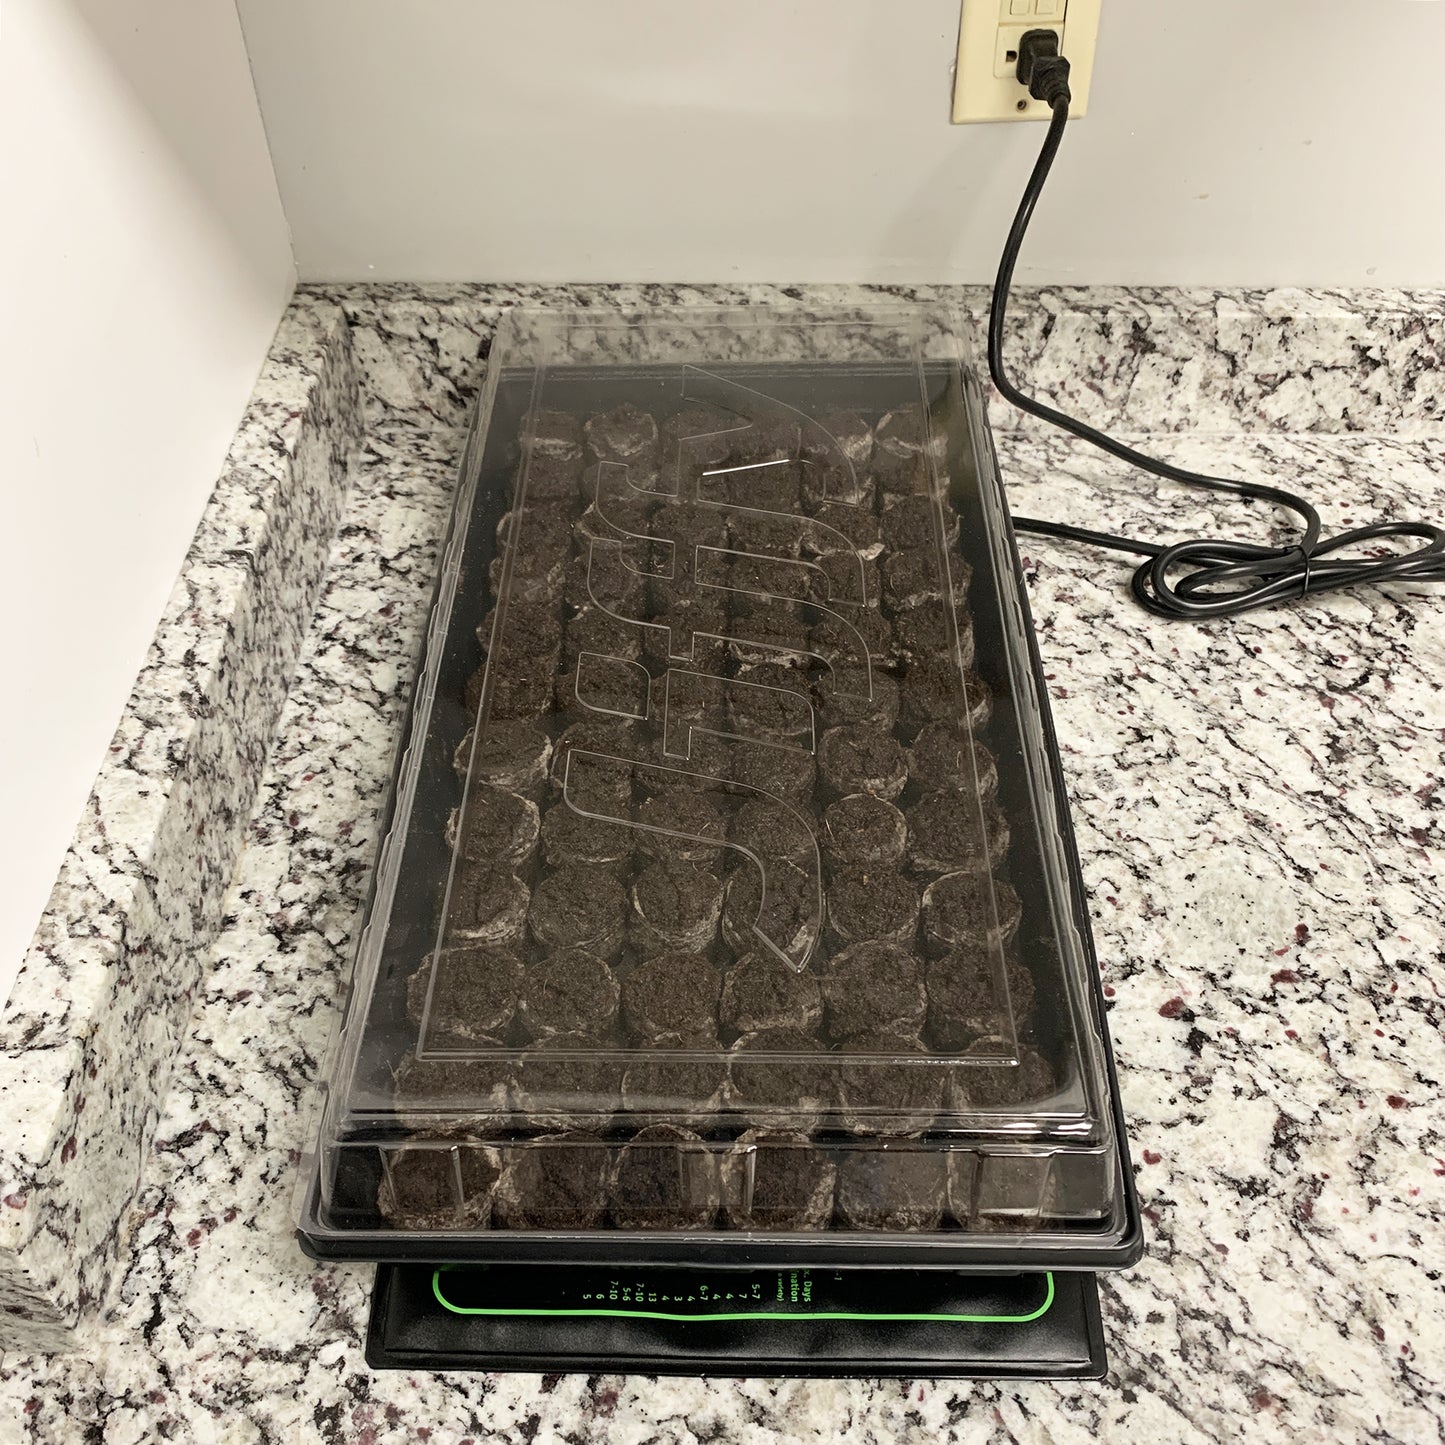 Your Complete Indoor Growing Seed Starting Kit with Vegetable Seeds